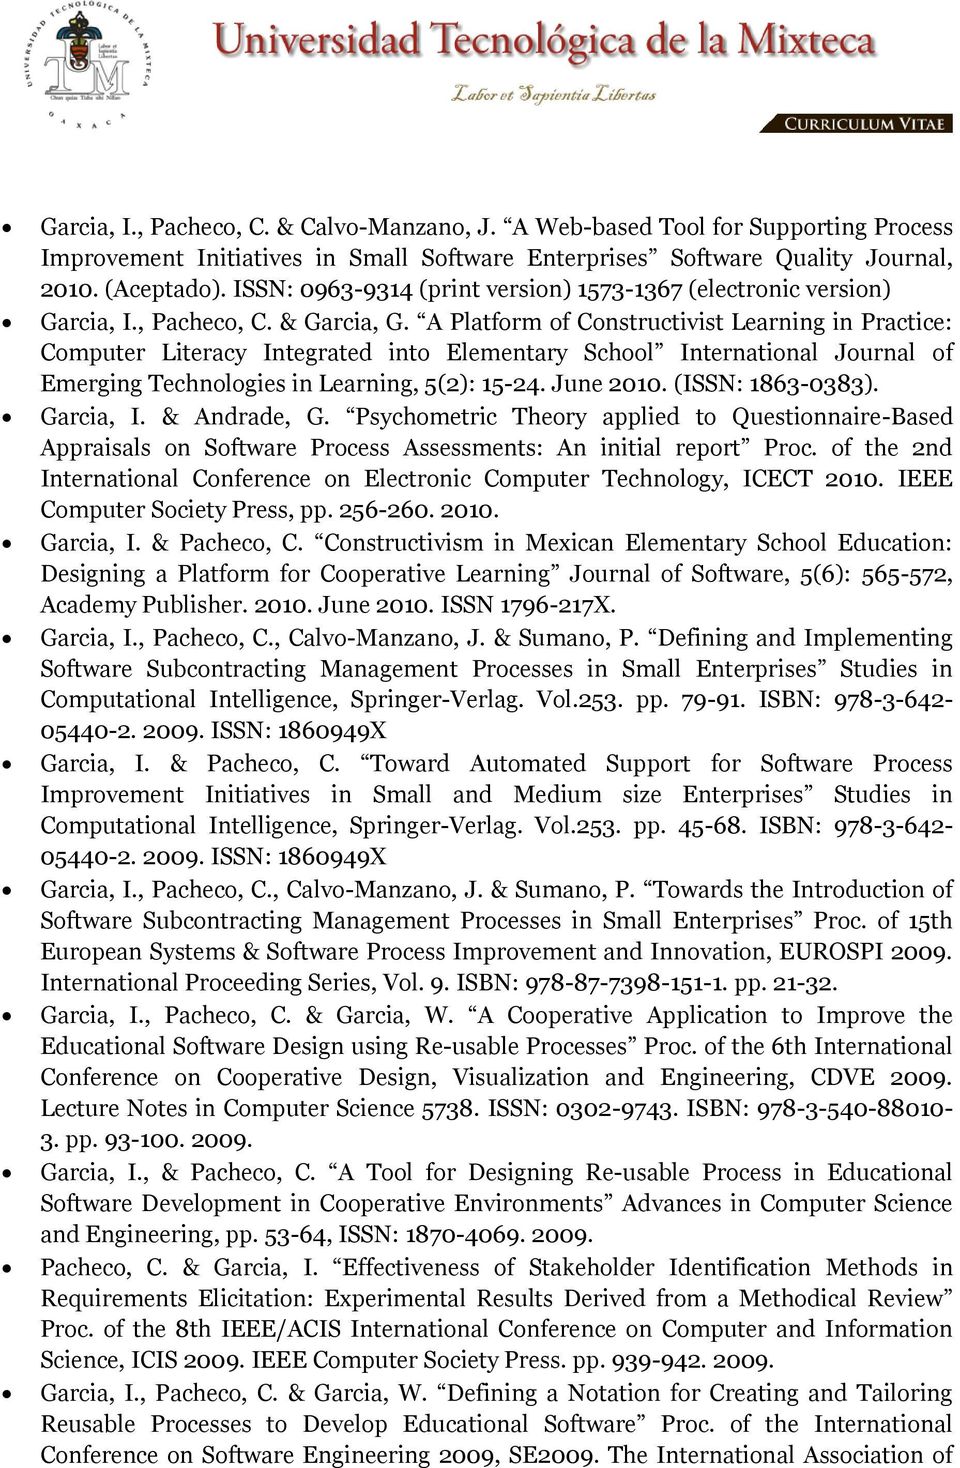 A Platform of Constructivist Learning in Practice: Computer Literacy Integrated into Elementary School International Journal of Emerging Technologies in Learning, 5(2): 15-24. June 2010.